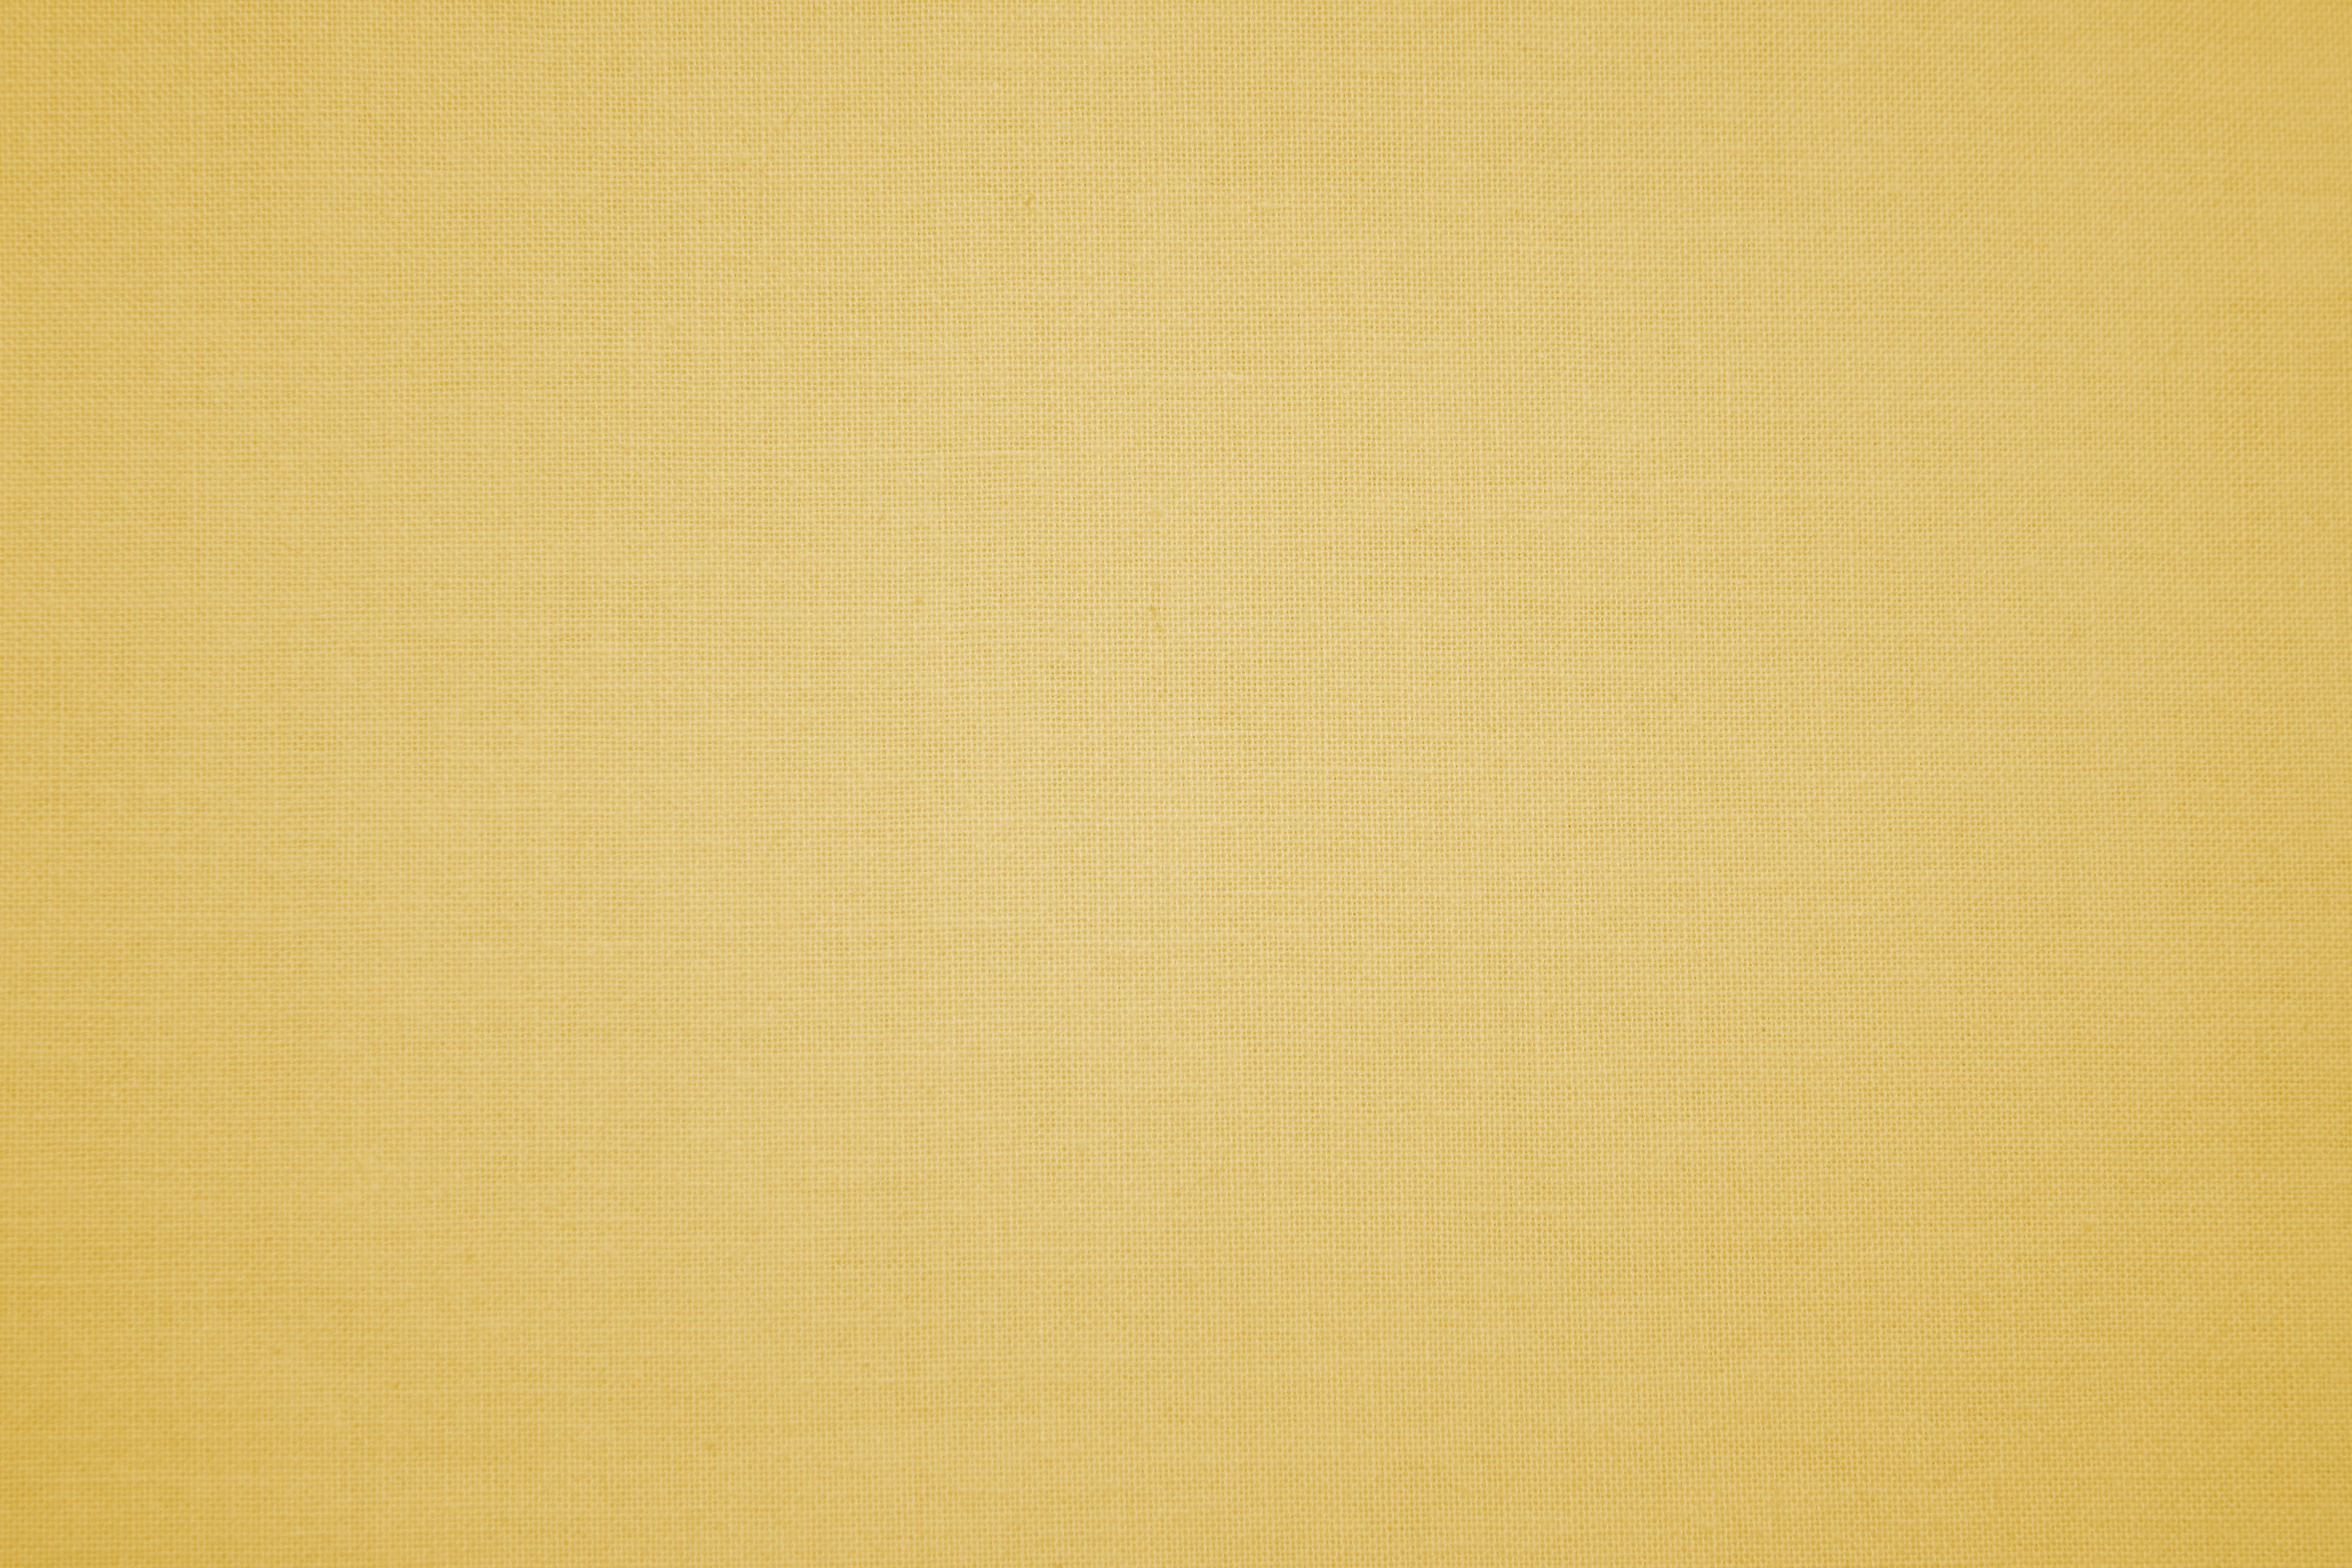 Gold Wallpaper Background for Powerpoint